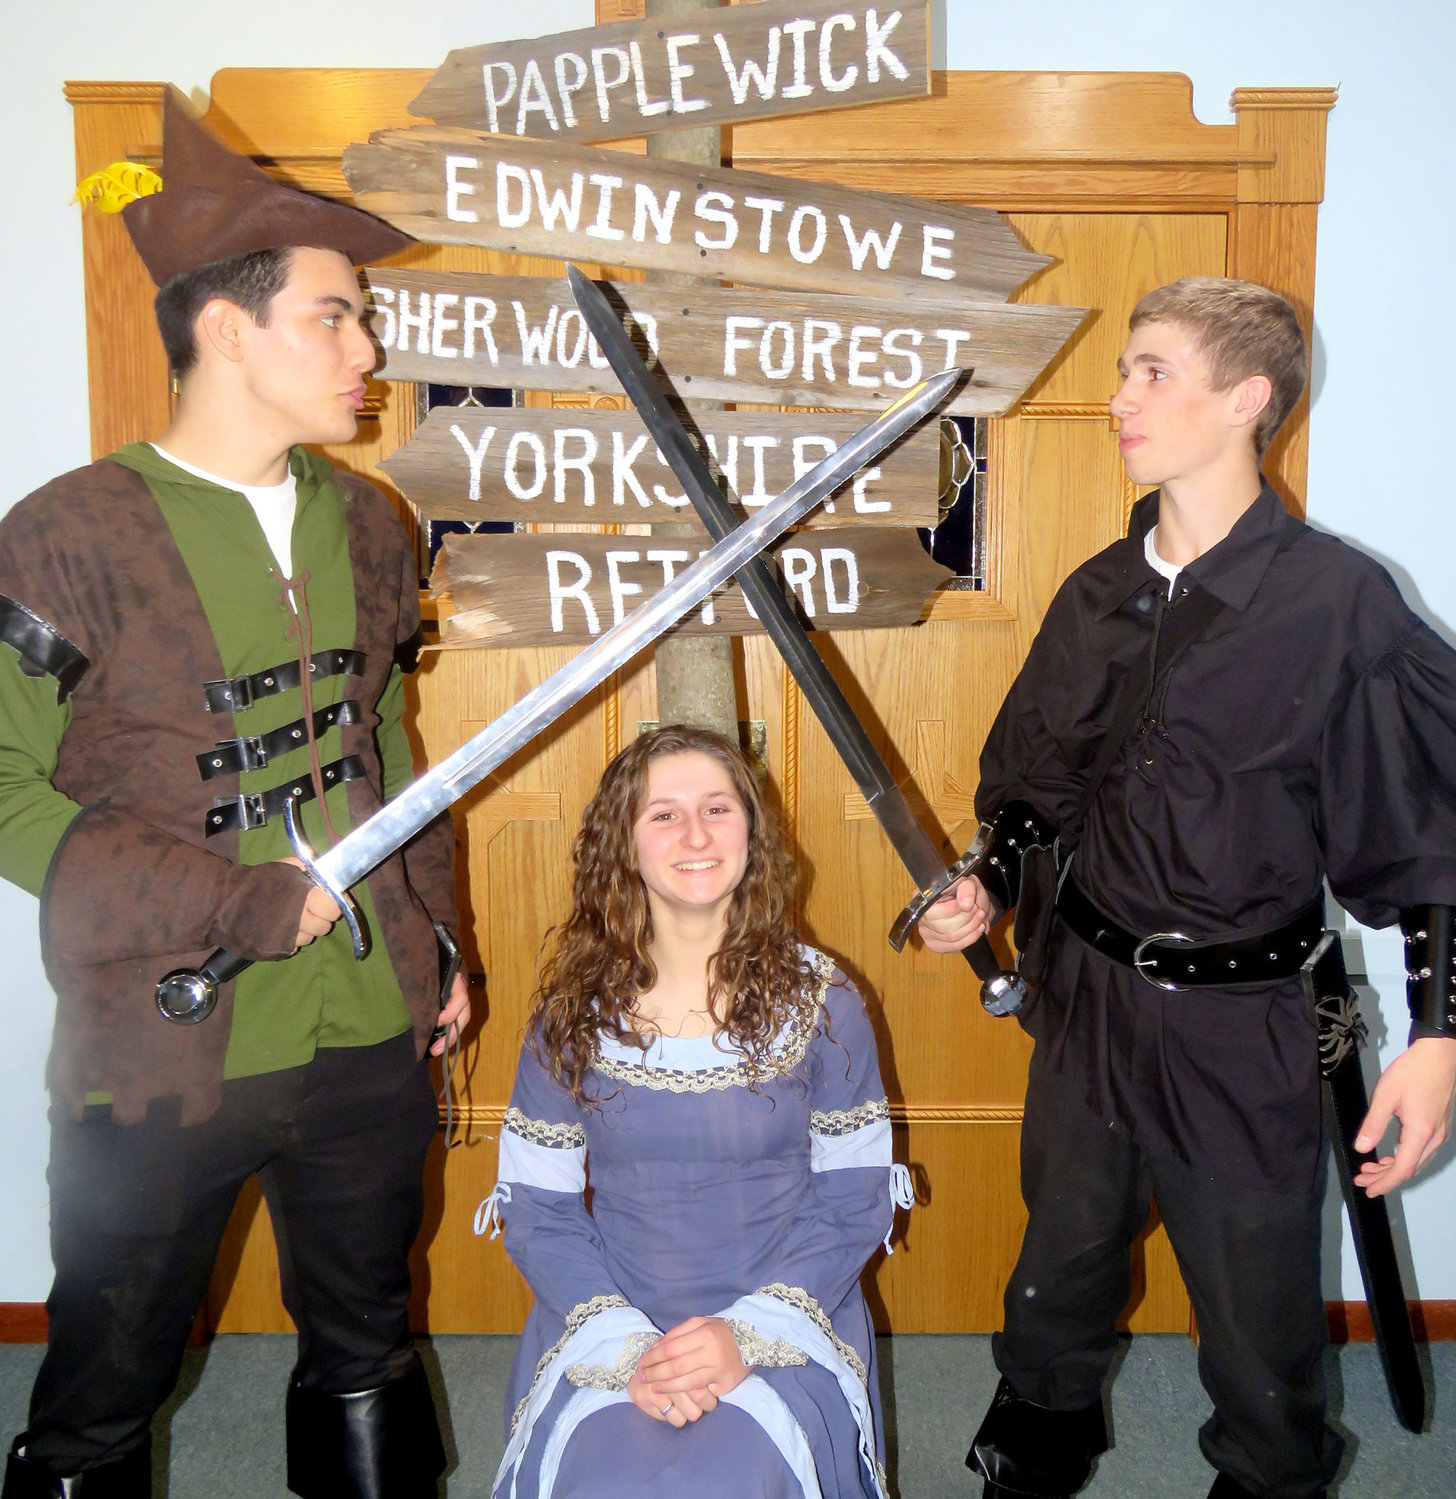 Luke Collins, left, as Robin Hood; Catherine Lohr, center, as Maid Marian and Mason Netzband as the Sheriff of Nottingham invite the public to their performance of ‘Robin Hood’ at 7 p.m. Dec. 9 and 10 and 2 p.m. Dec. 11 at Holy Cross Academy in Oneida.